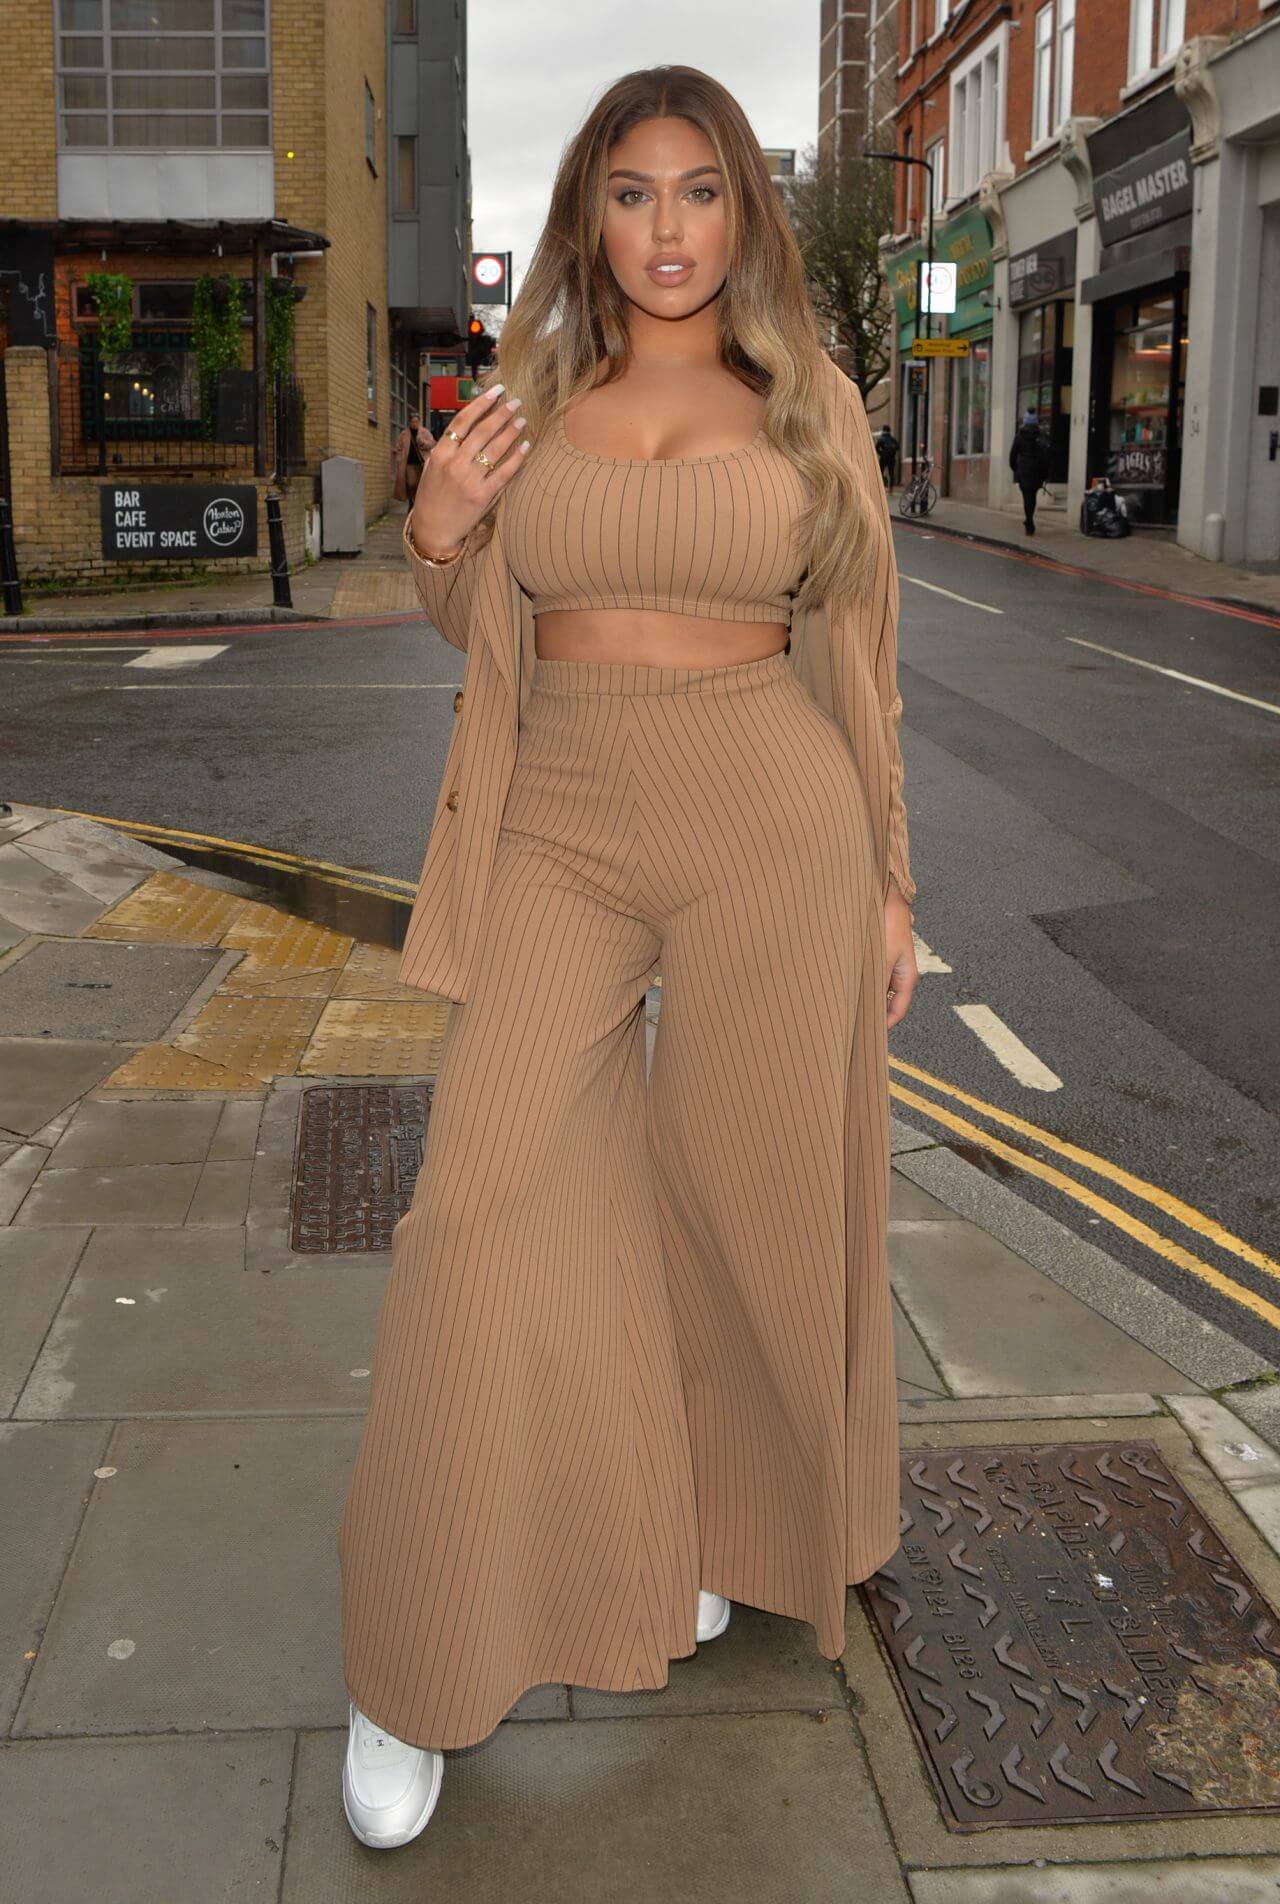 Anna Vakili In Brown Crop Top & Flare Palazzo Pants With Long Shrug At HLD Studios in London